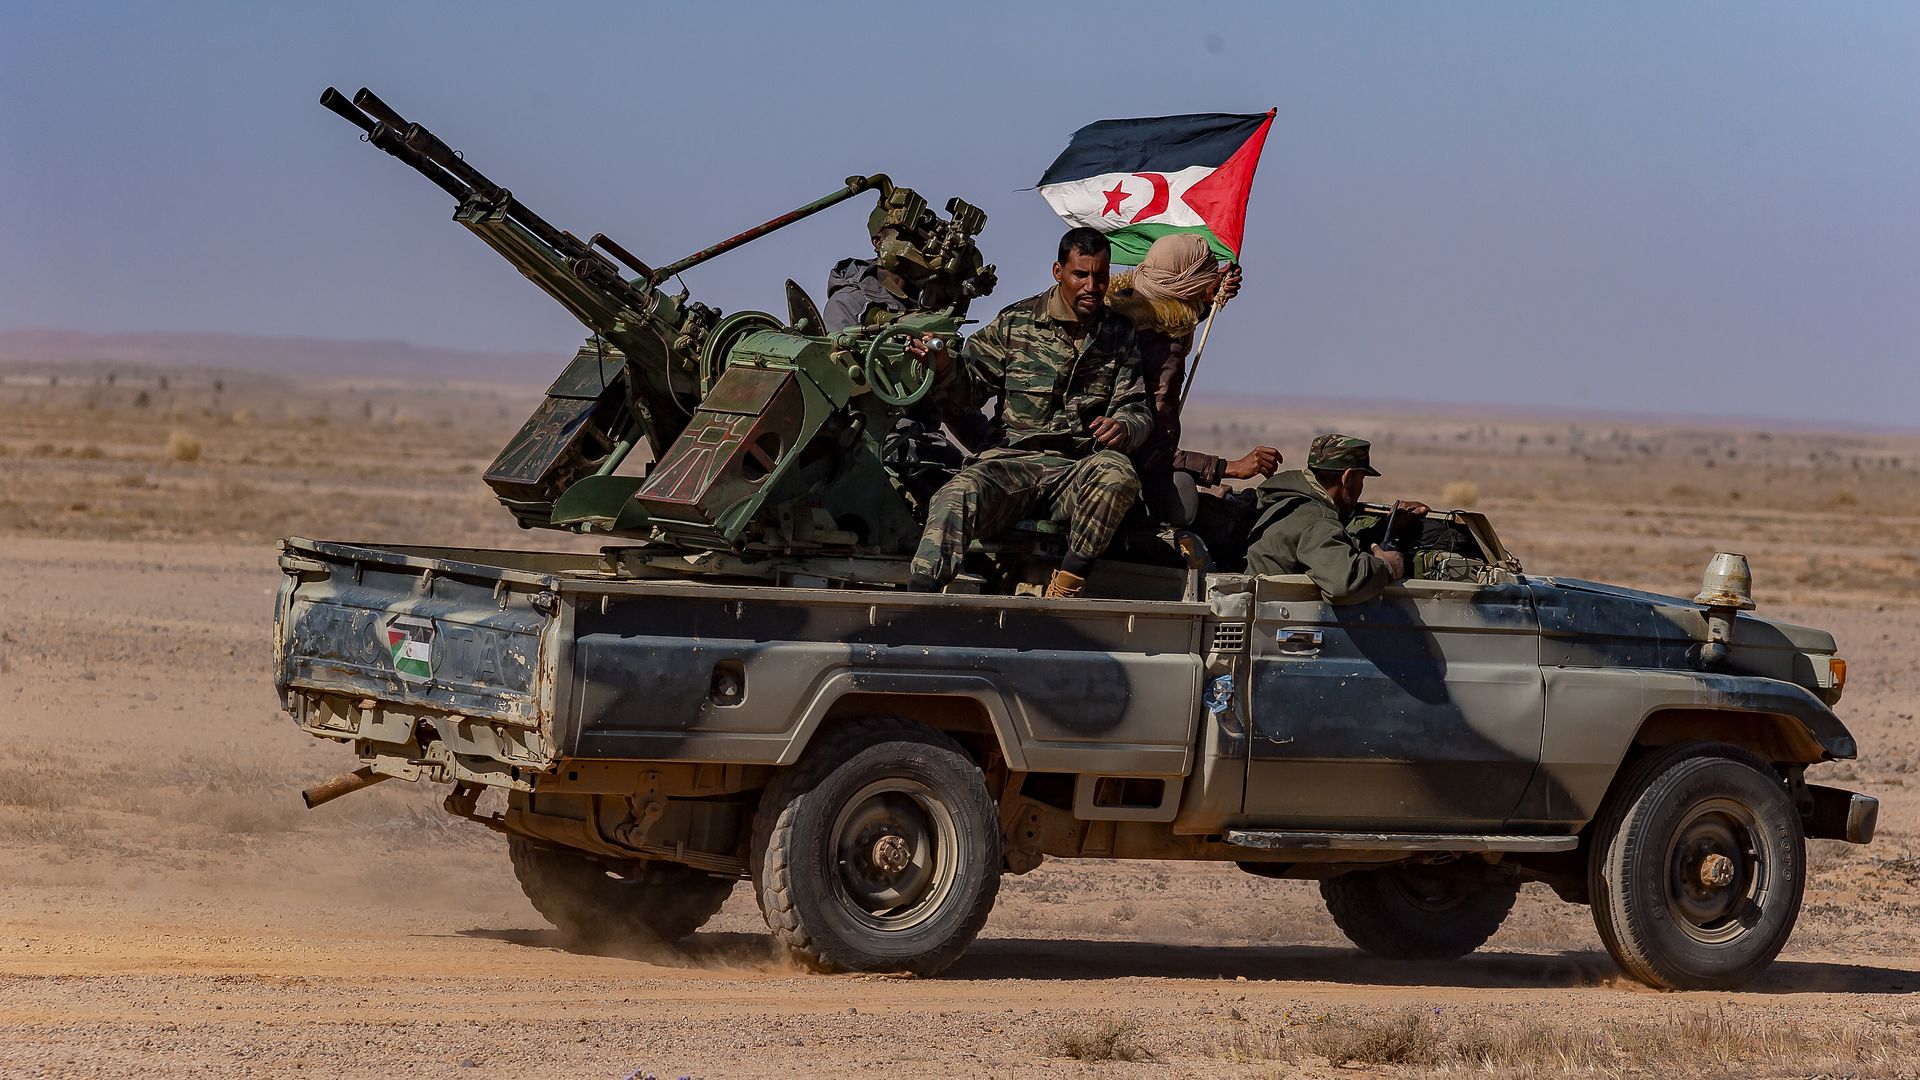 Military units from the Arab Democratic Republic Saharawi performing manoeuvres in Western Sahara in January 2019.